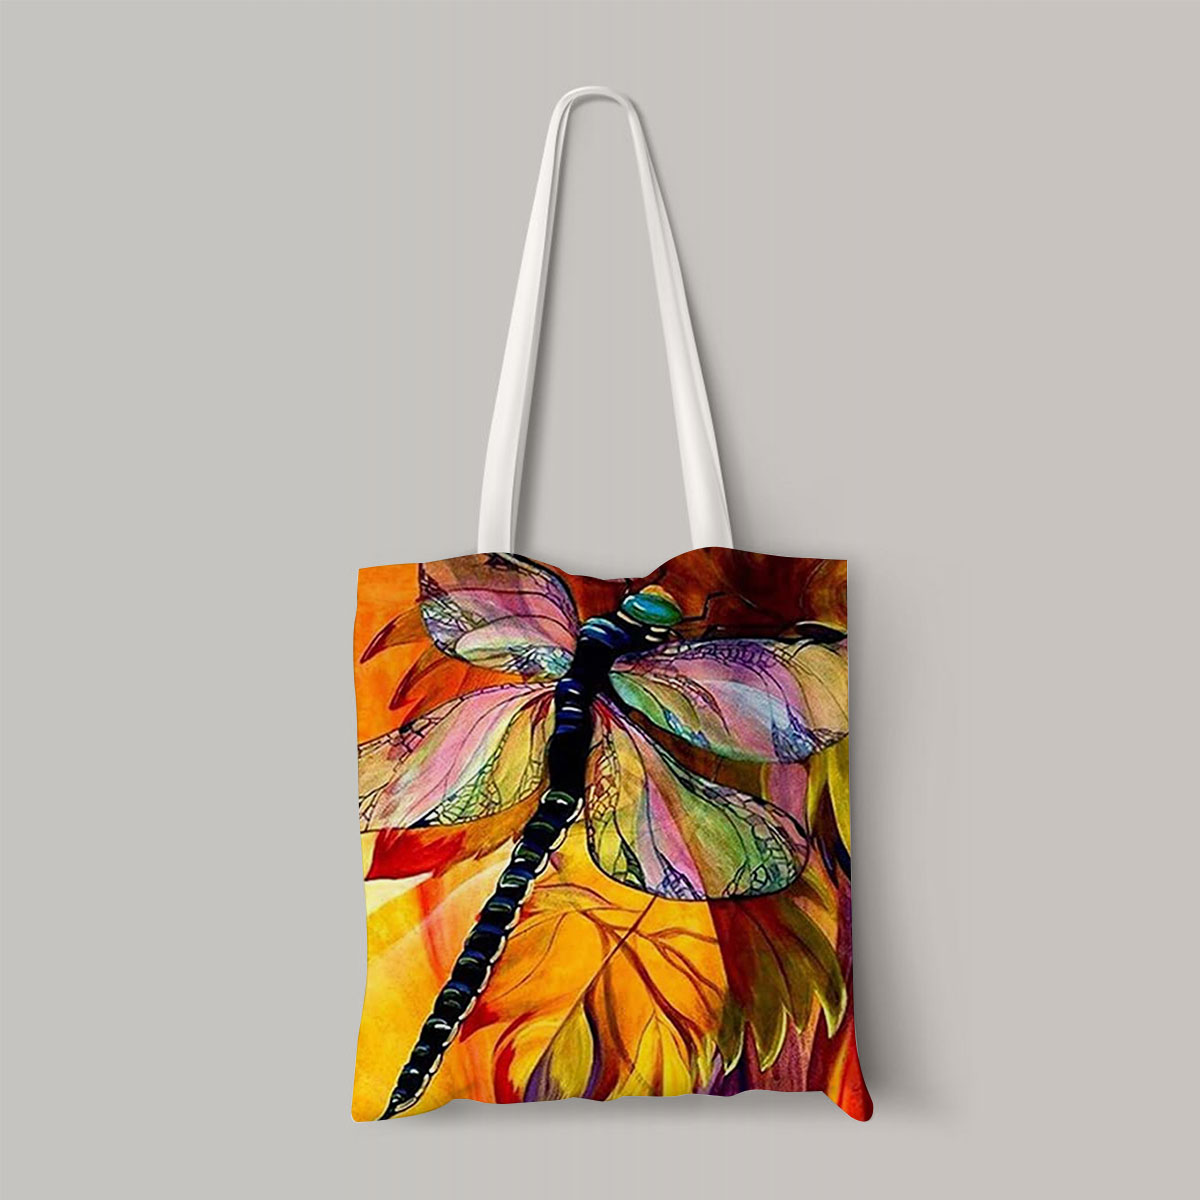 The Sunset Dragonfly Totebag